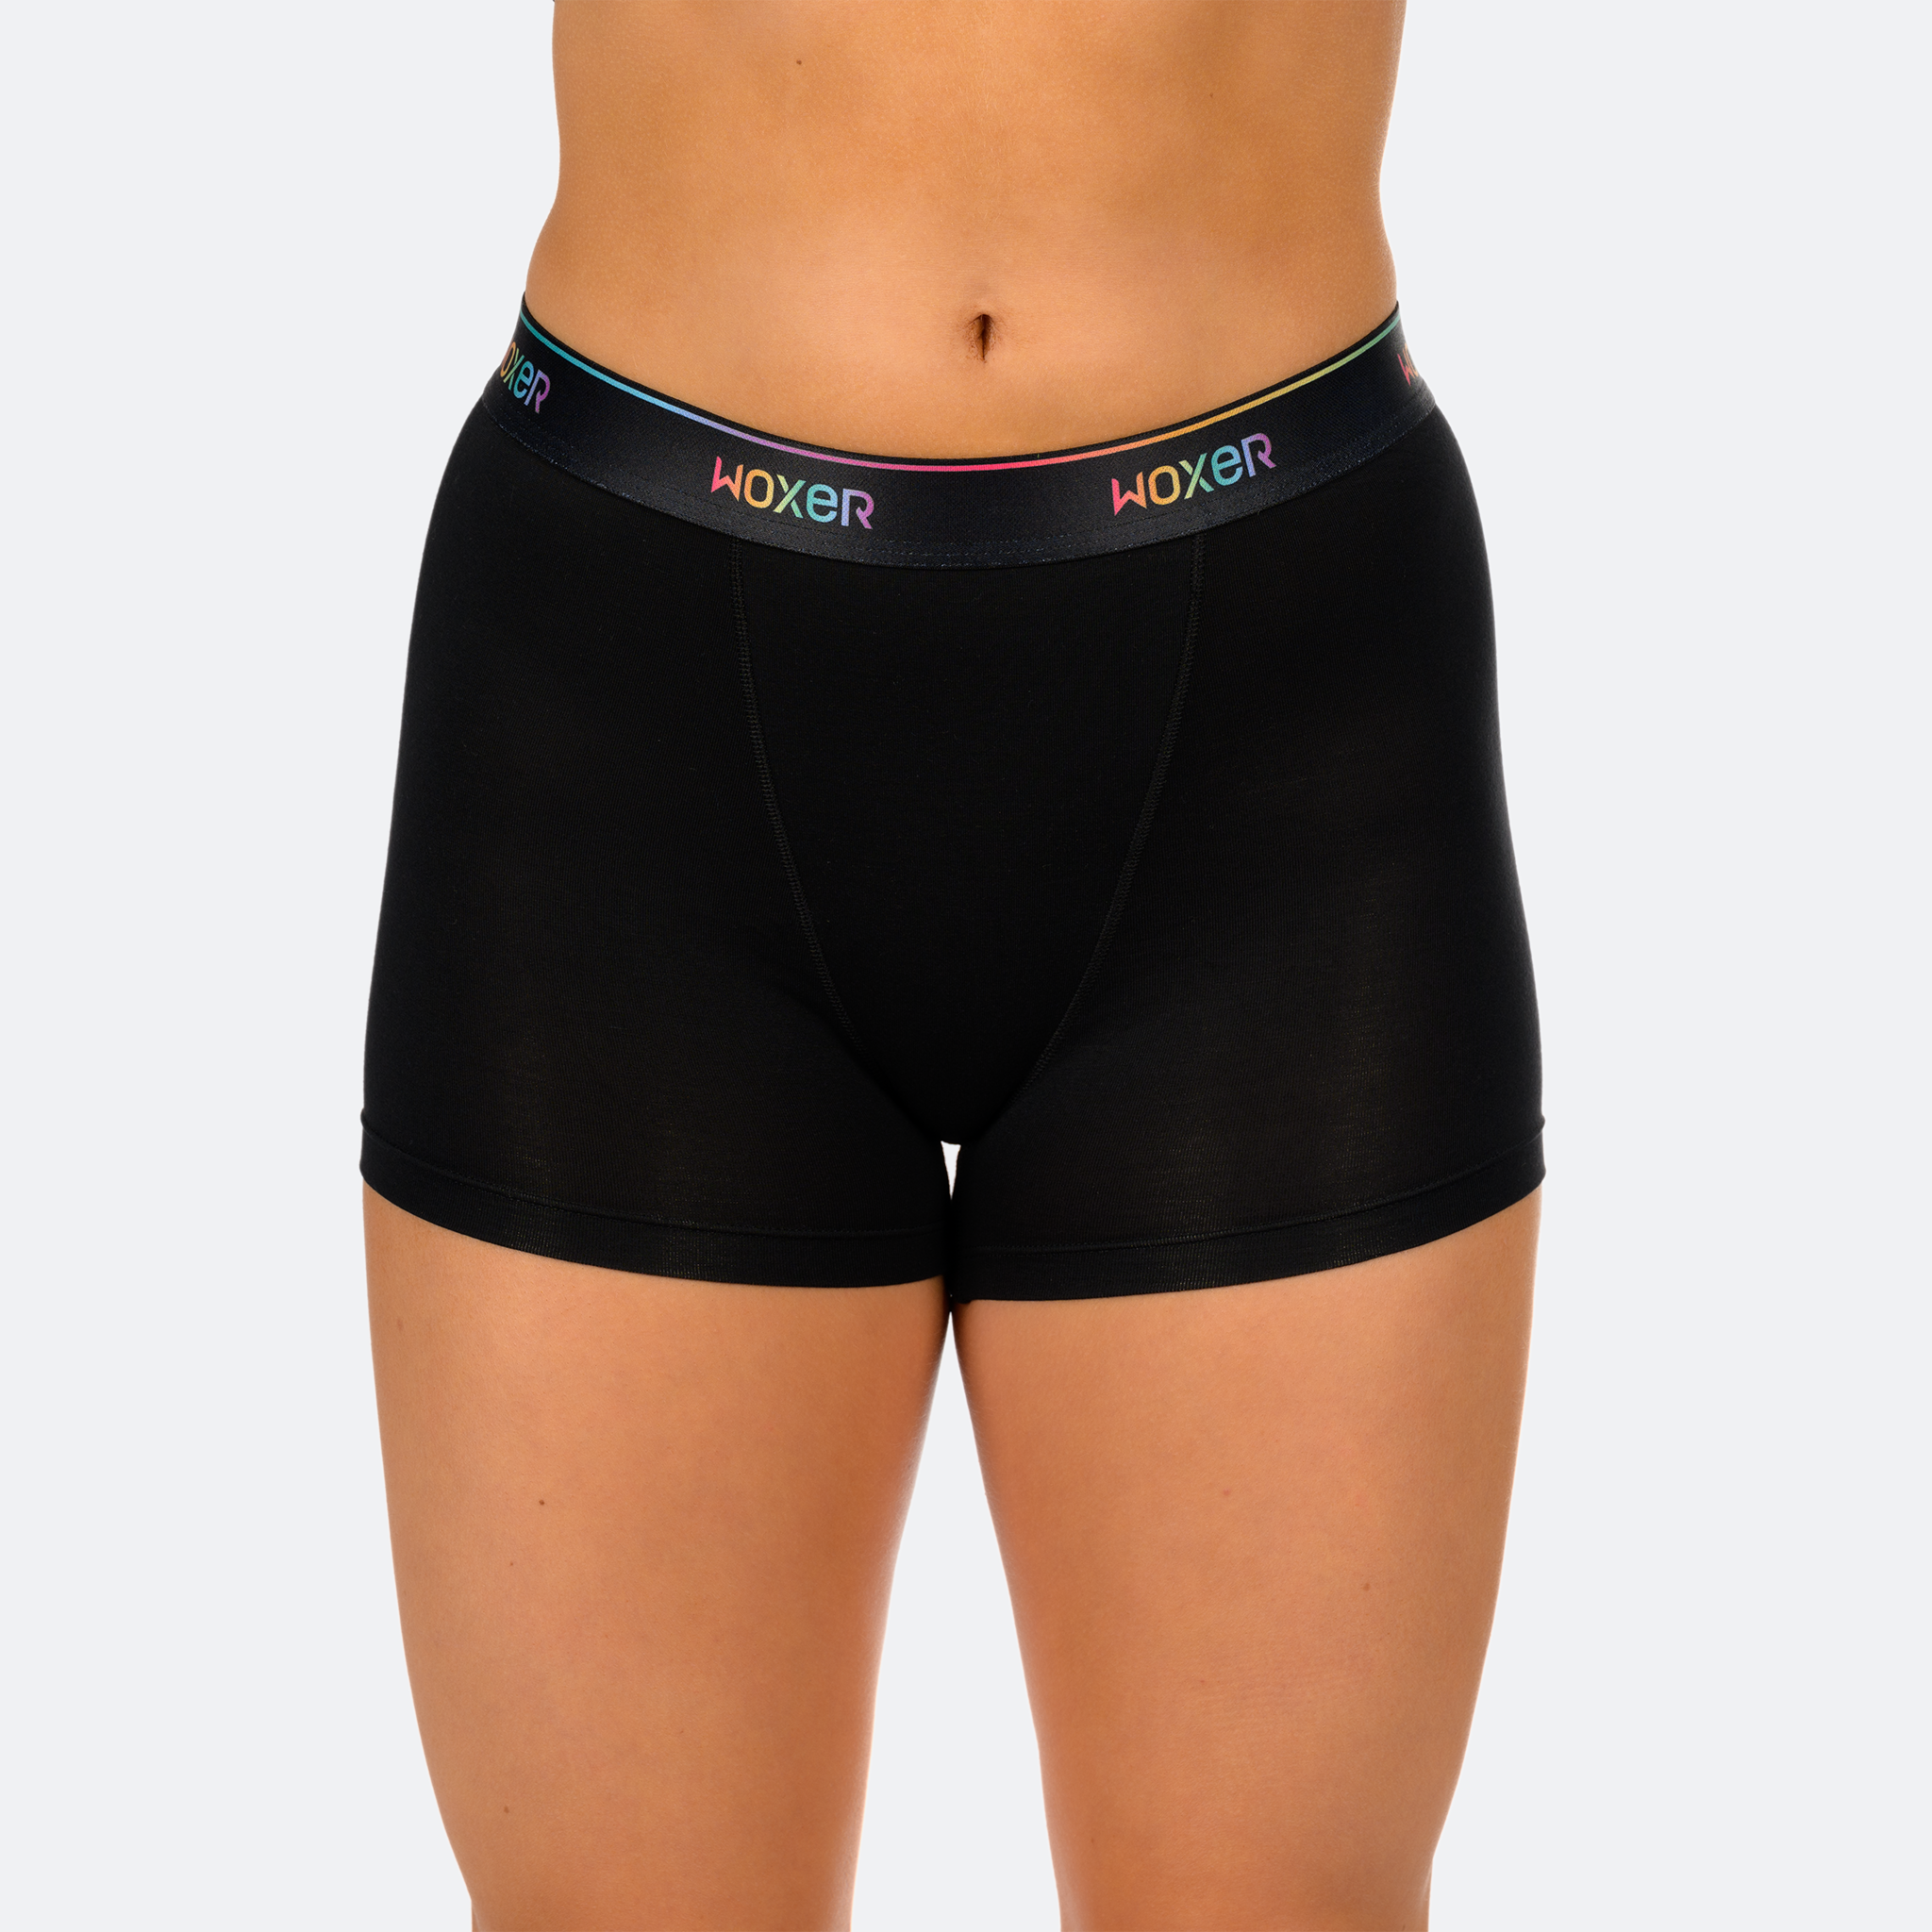 Star Boxer Black Shorts | Briefs | Pride 3.0 Waisted Woxer | for High Girls Women Boxer